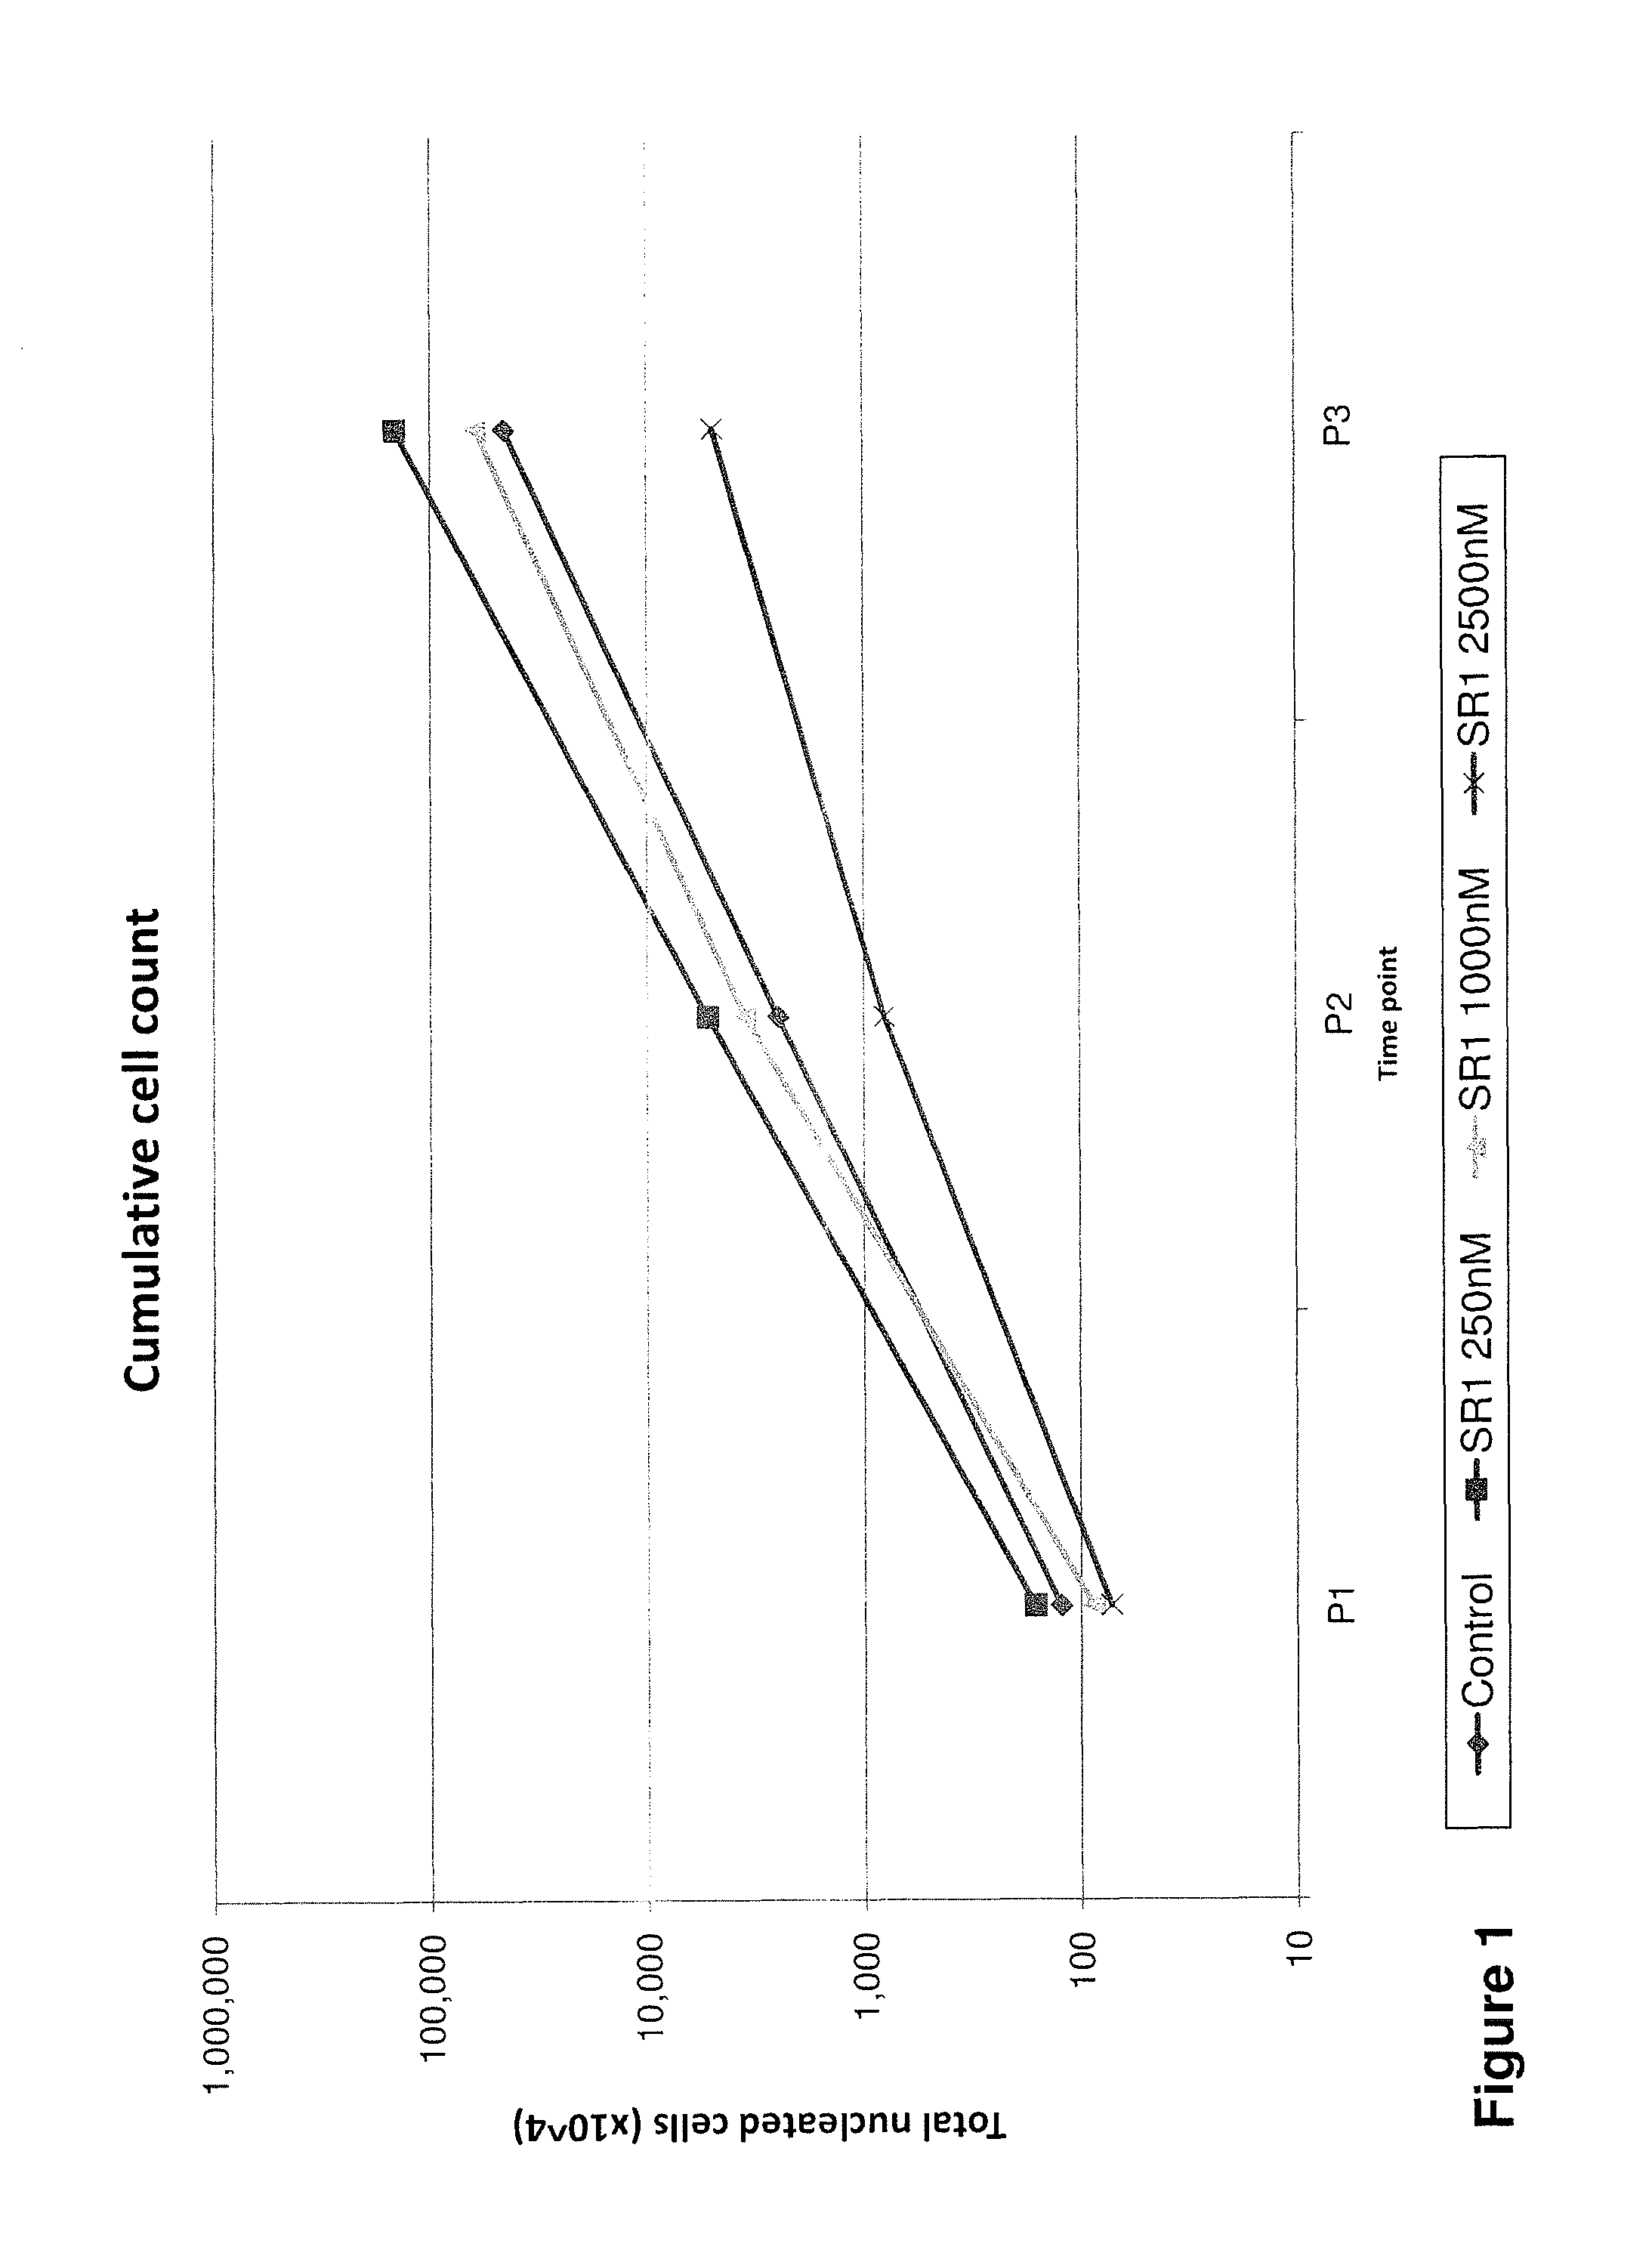 Methods of culturing and expanding mesenchymal stem cells